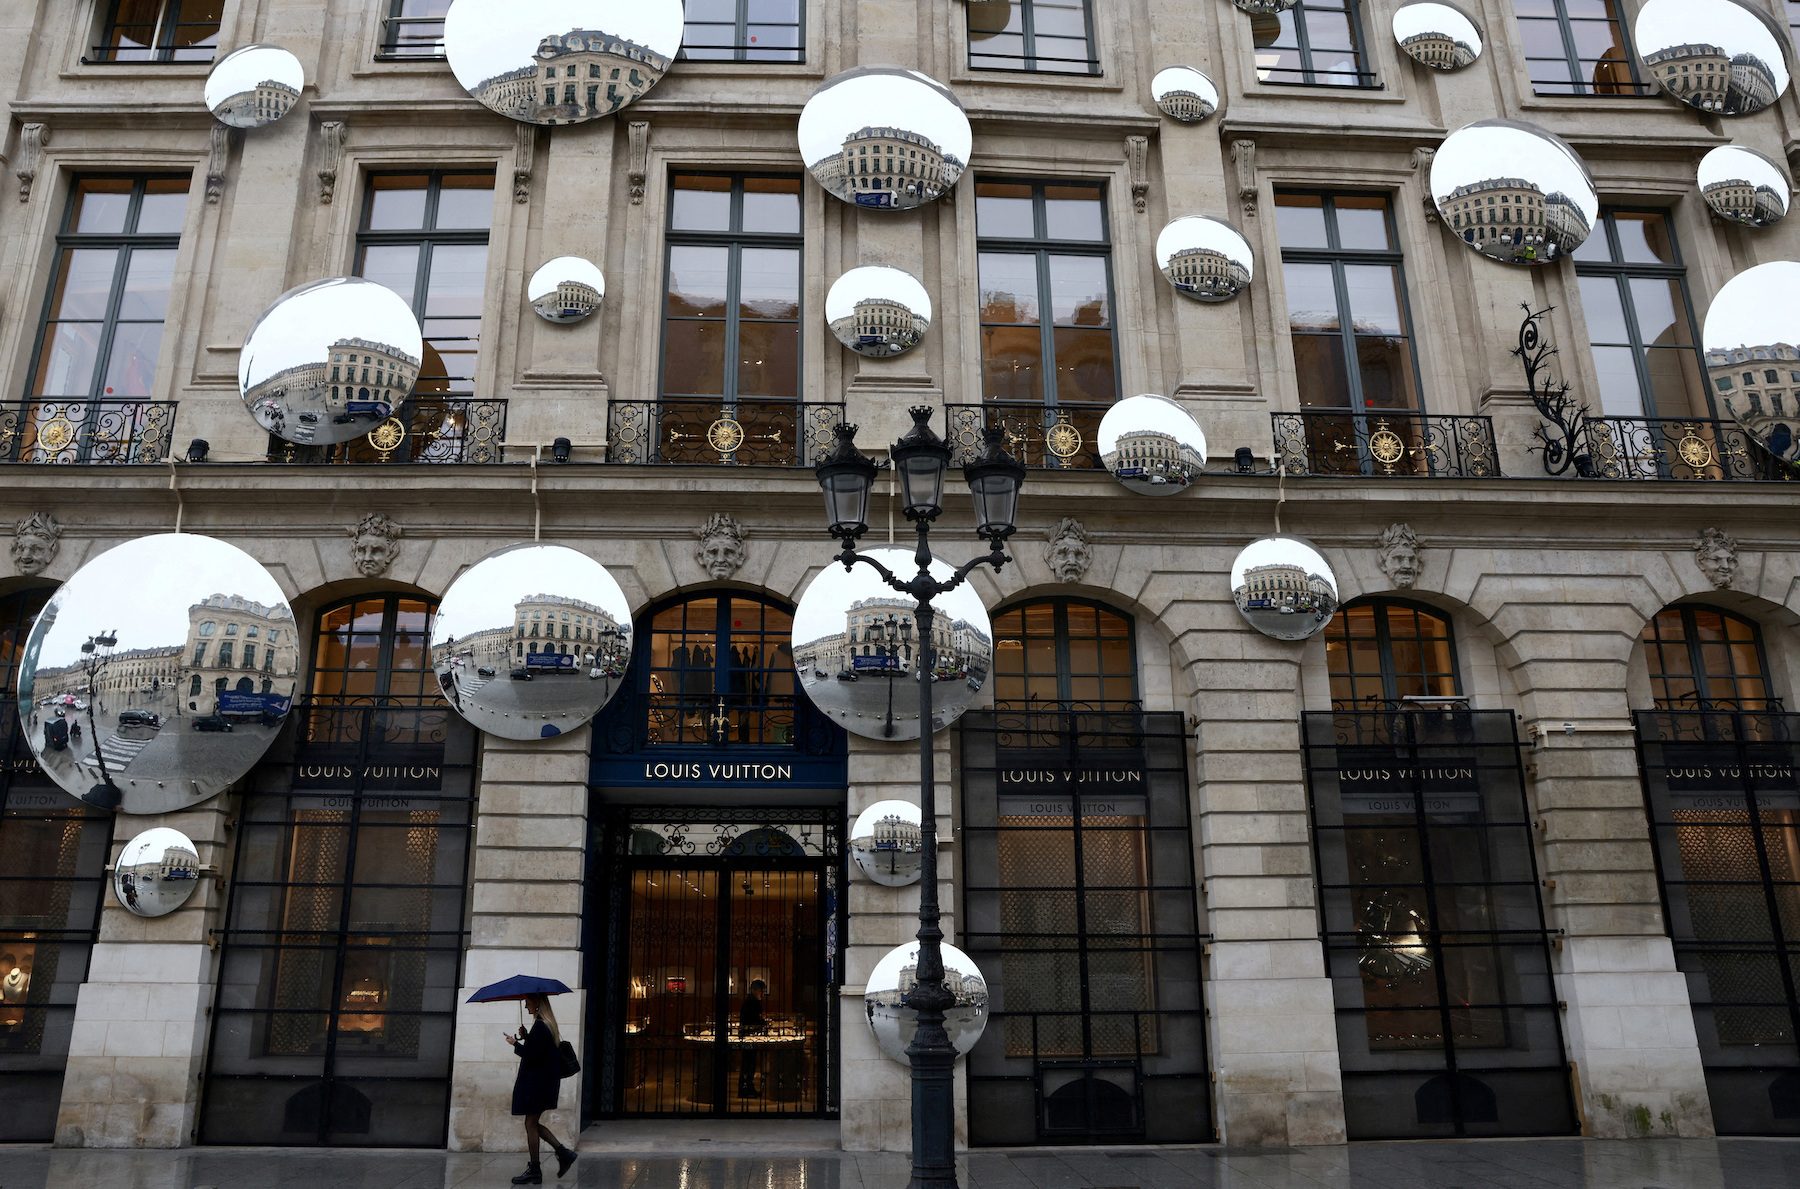 LVMH fashion sales rise 22% as China shows signs of rebound